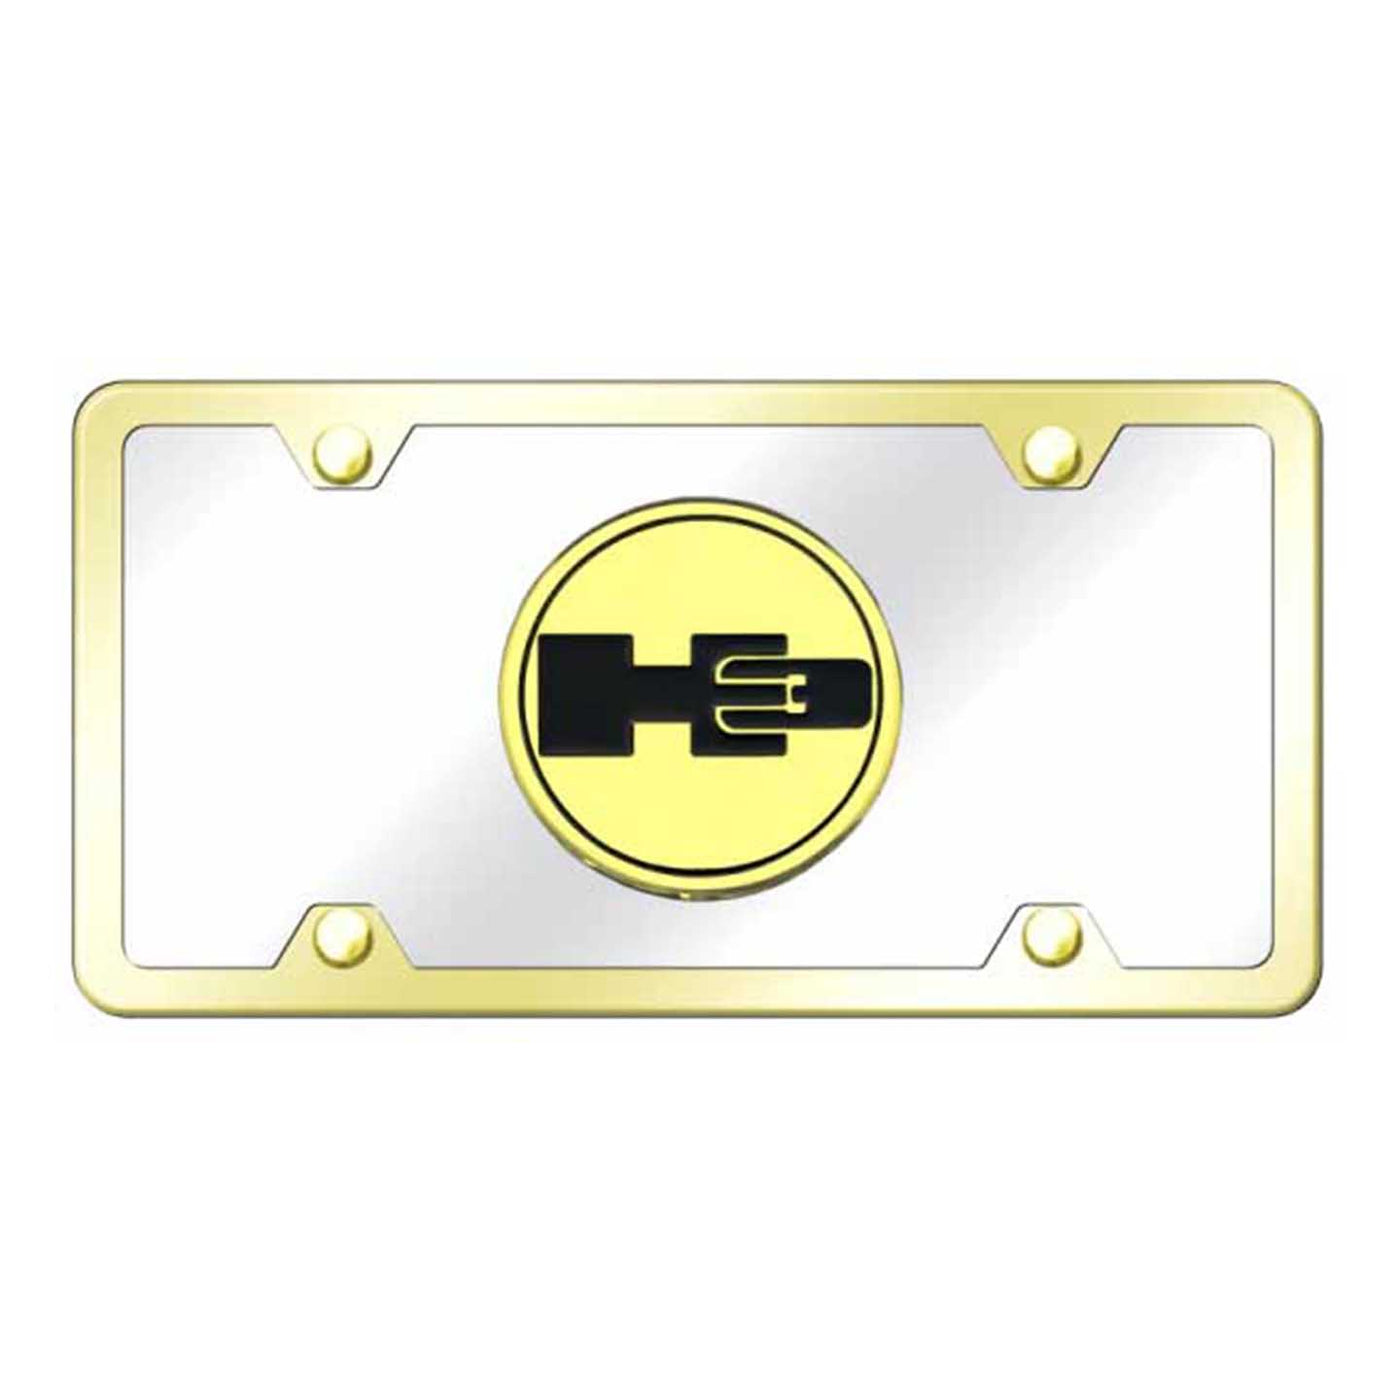 Hummer H3 Plate Kit - Gold on Mirrored